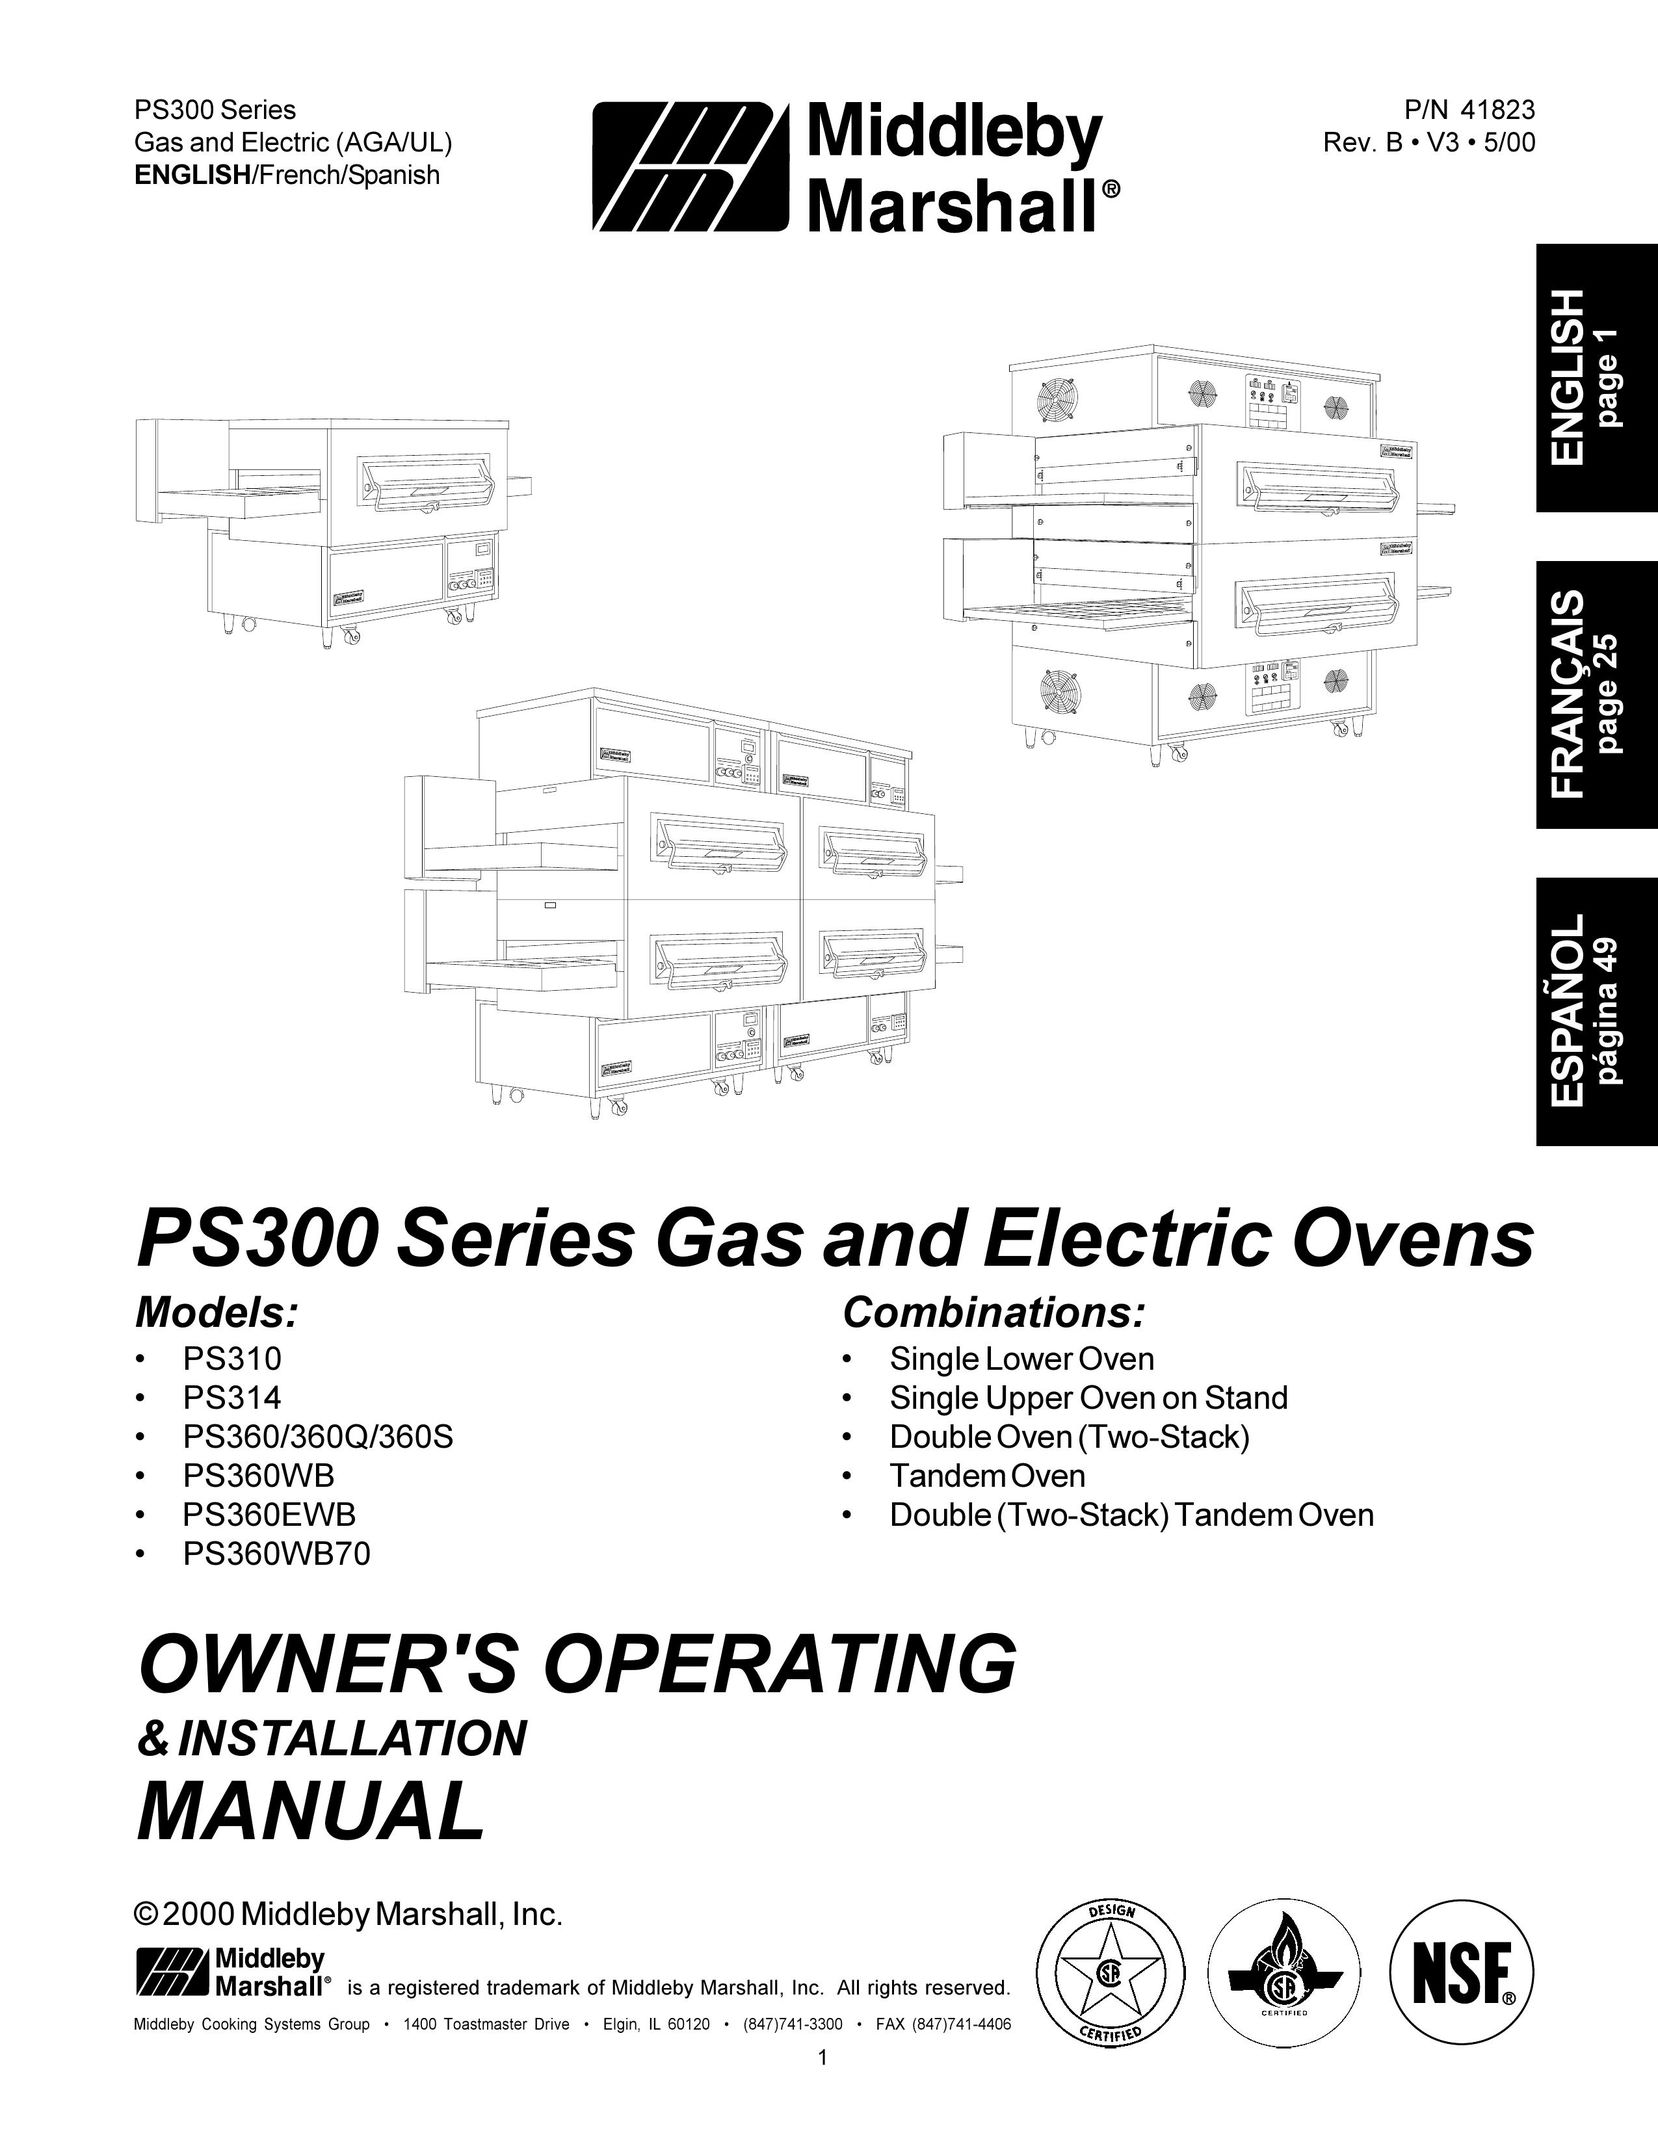 Middleby Marshall PS360WB Oven User Manual